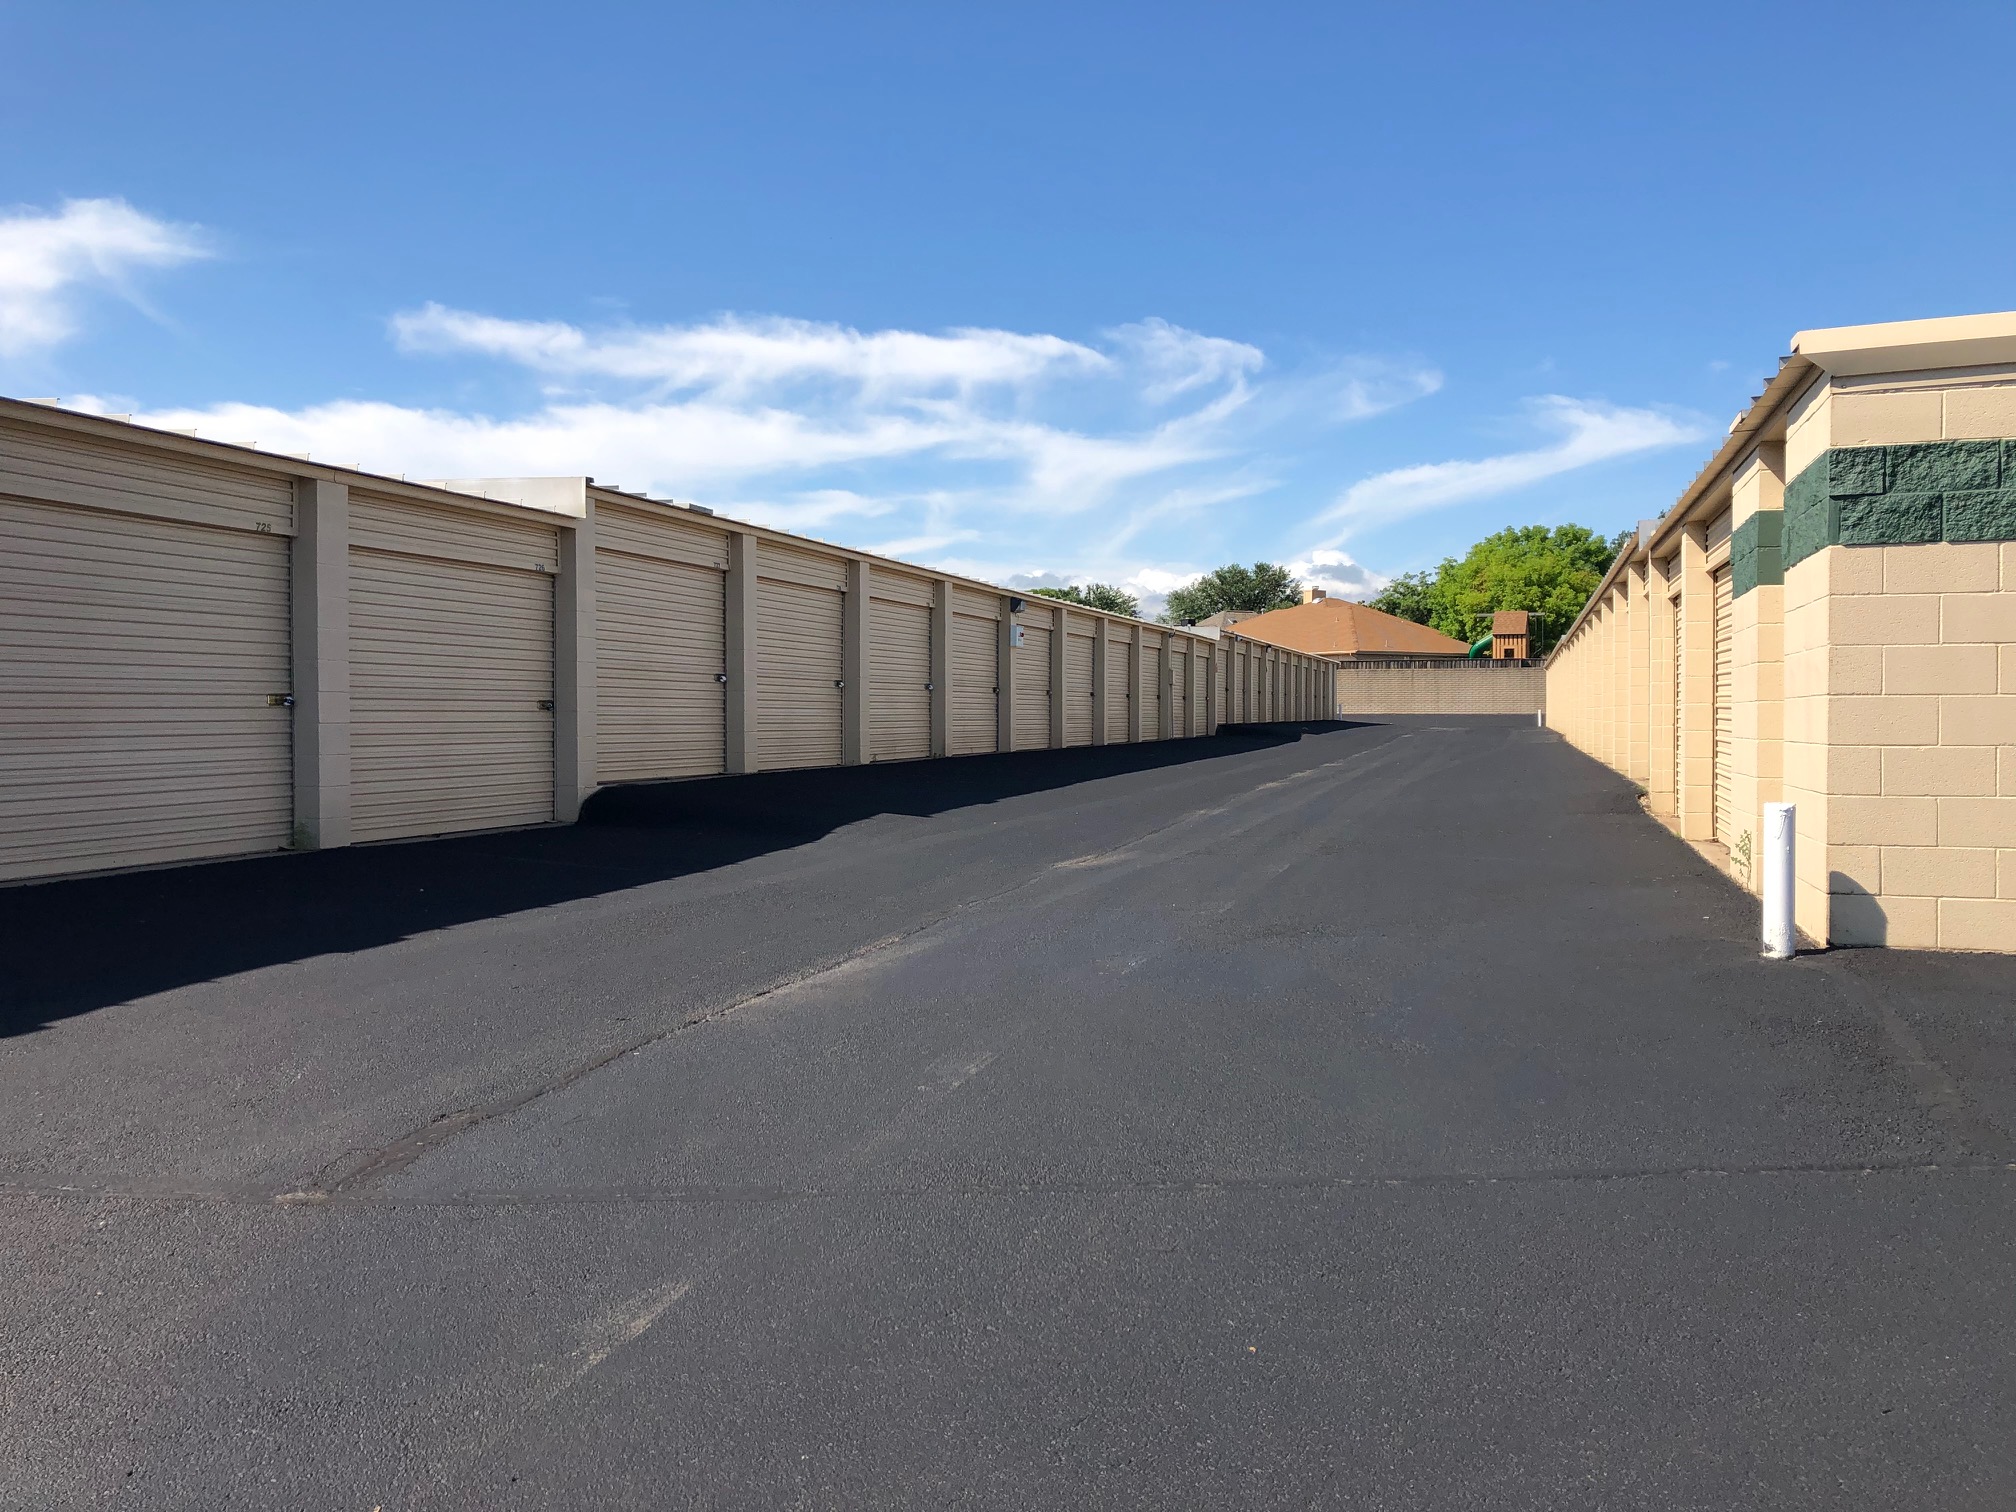 Wide aisles to access your drive up storage unit easily